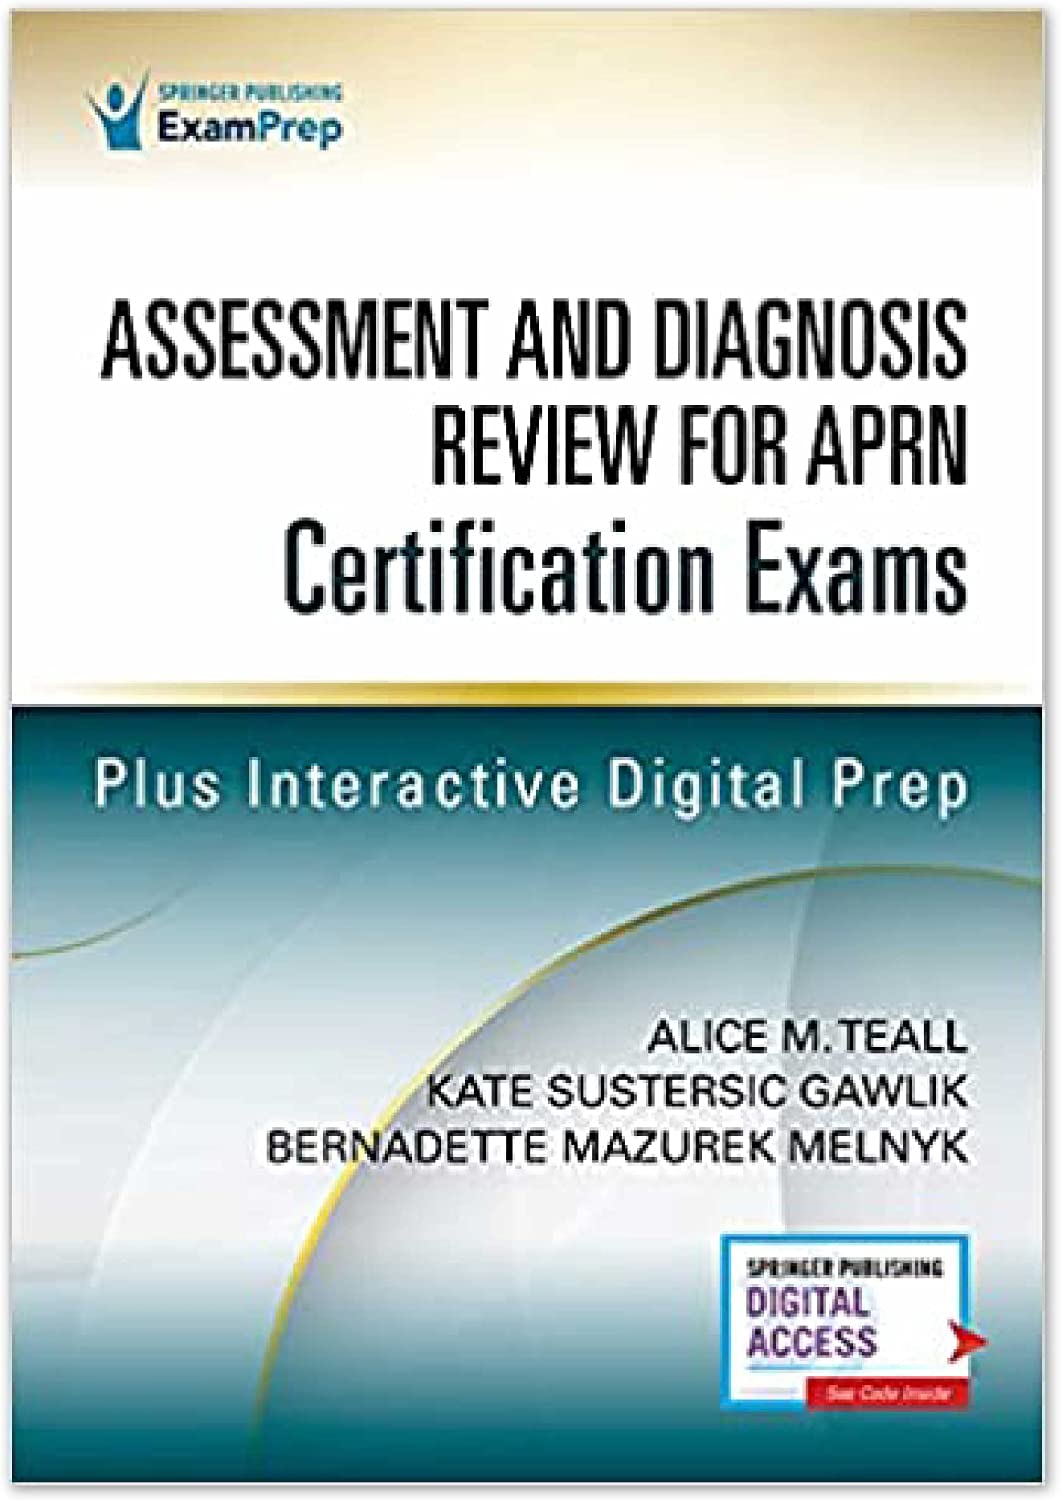 Assessment and Diagnosis Review for Advanced Practice Nursing Certification Exams 1st Edition – Nurse Practitioner Review Book That Includes Digital Content Via ExamPrepConnect